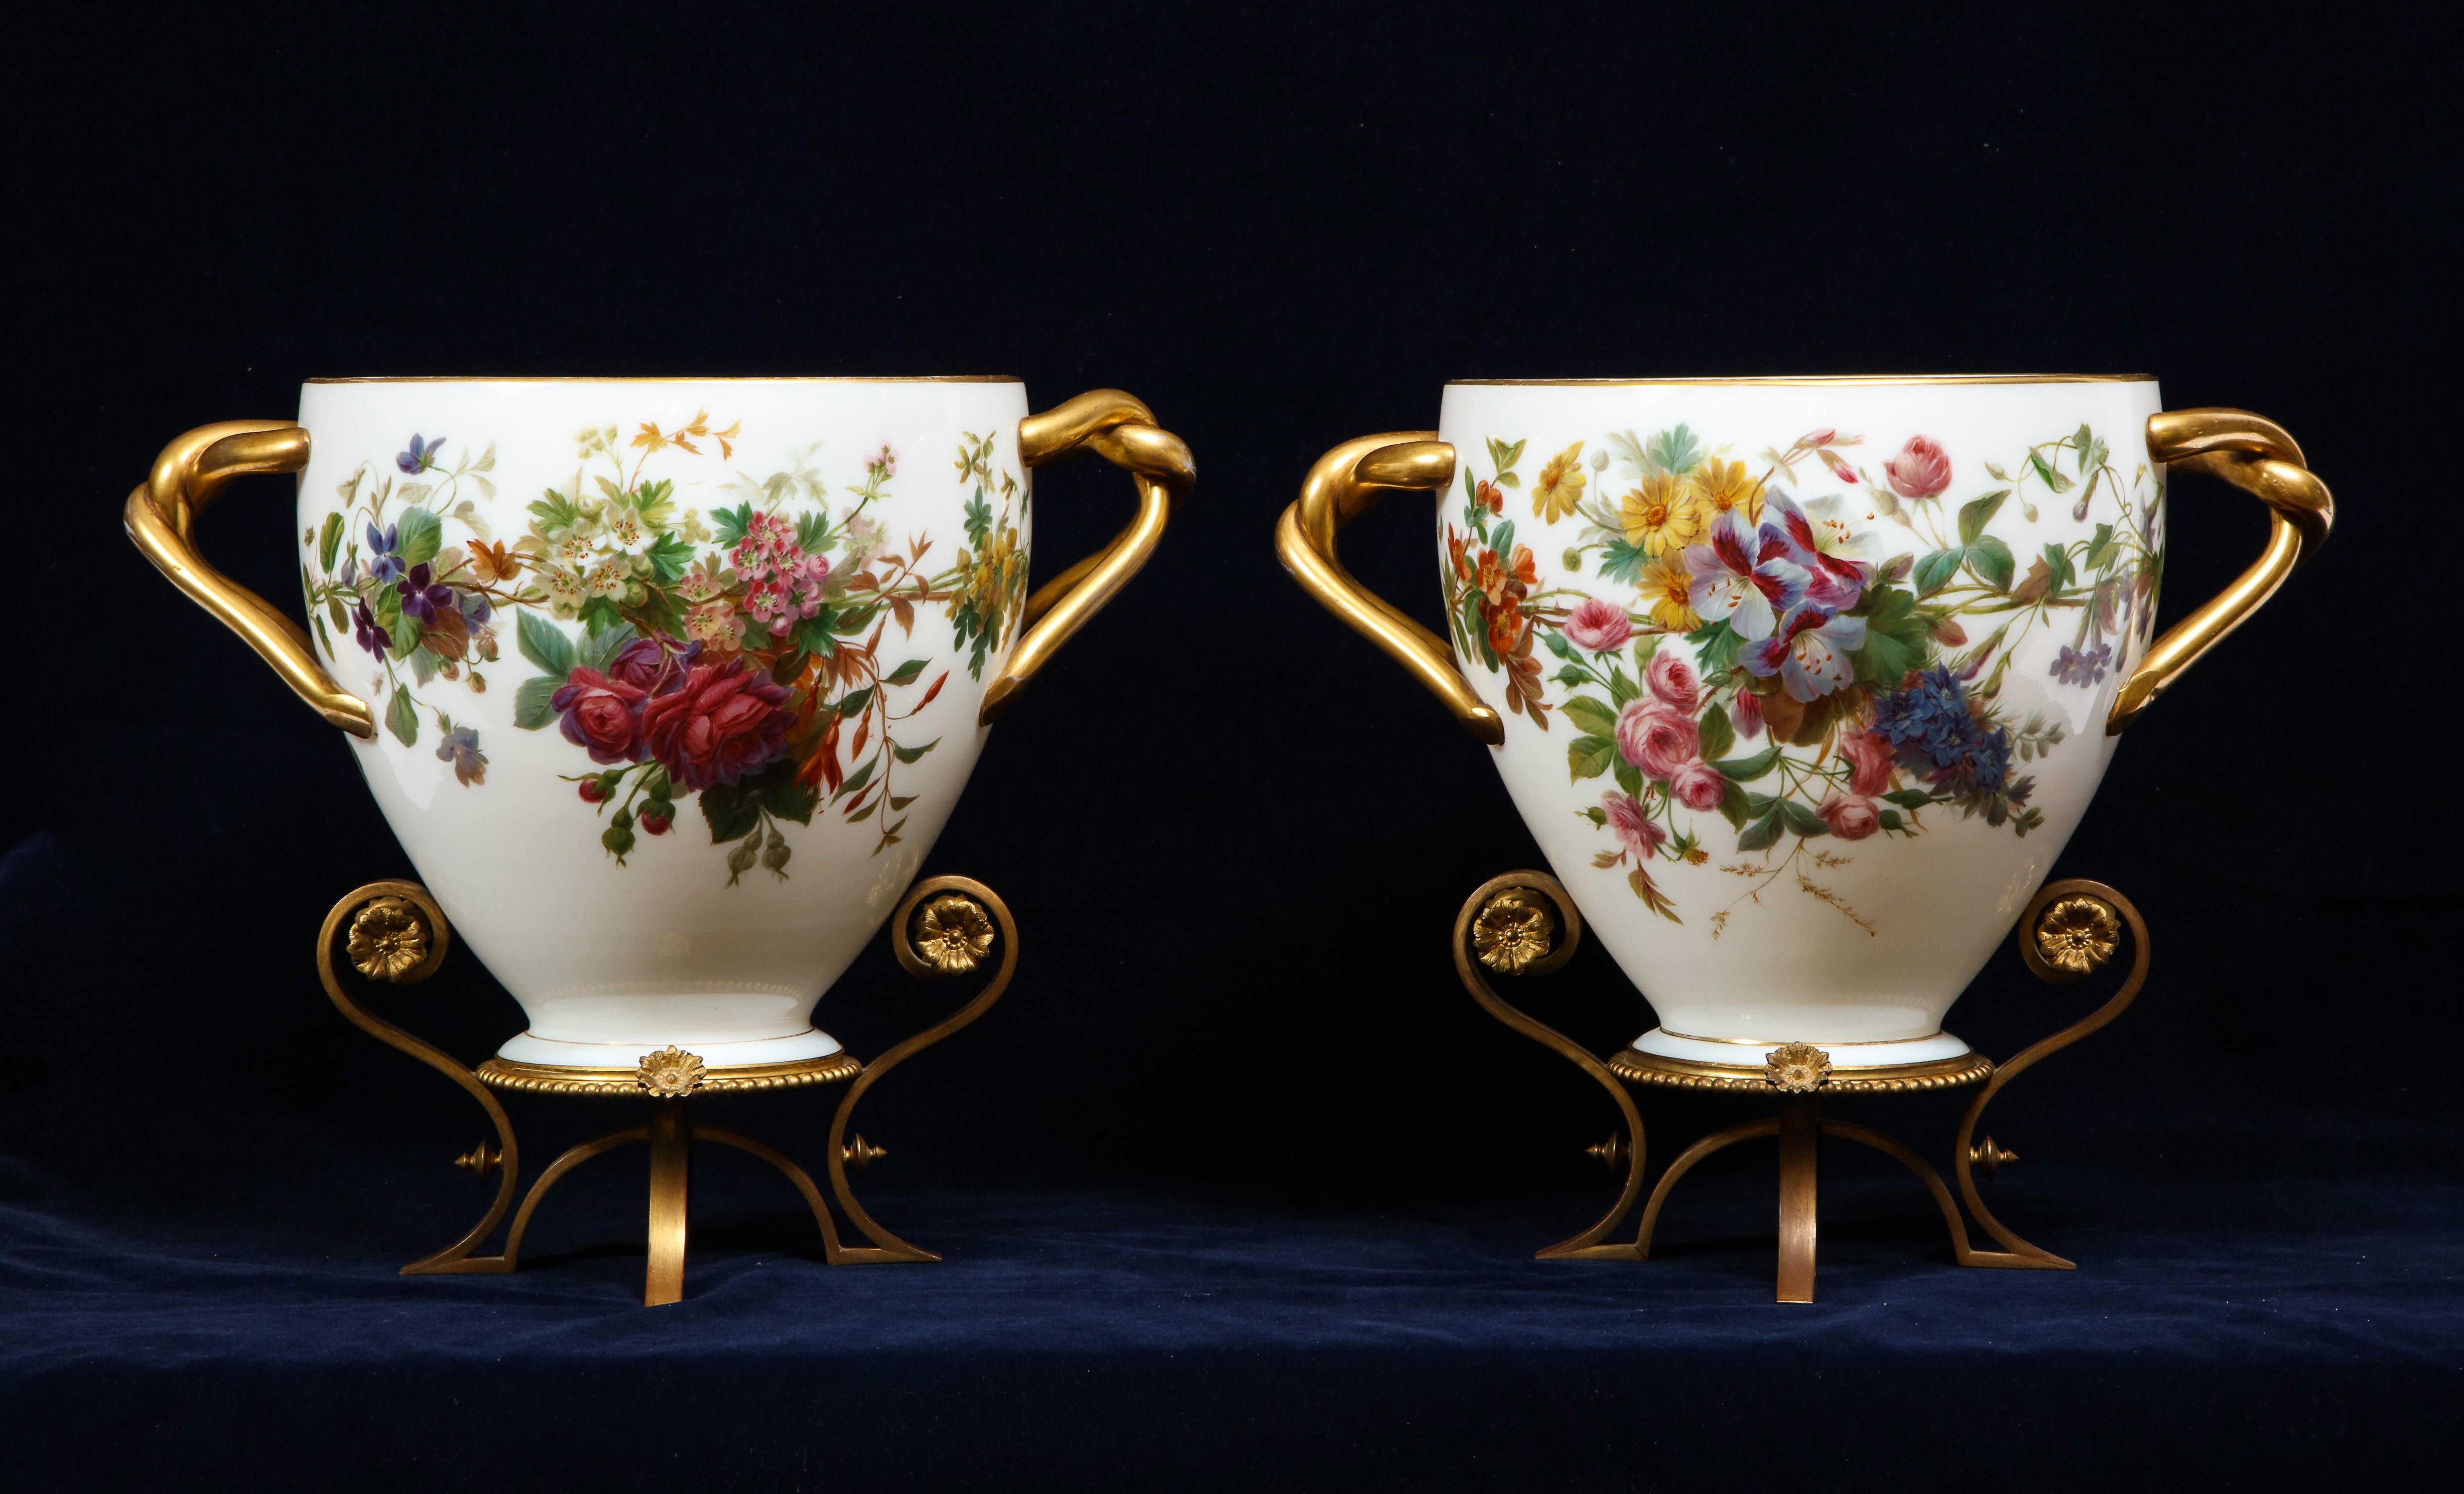 Louis XVI Important Pair of Enamel Hand-Painted White Opaline Vases Signed by Baccarat For Sale